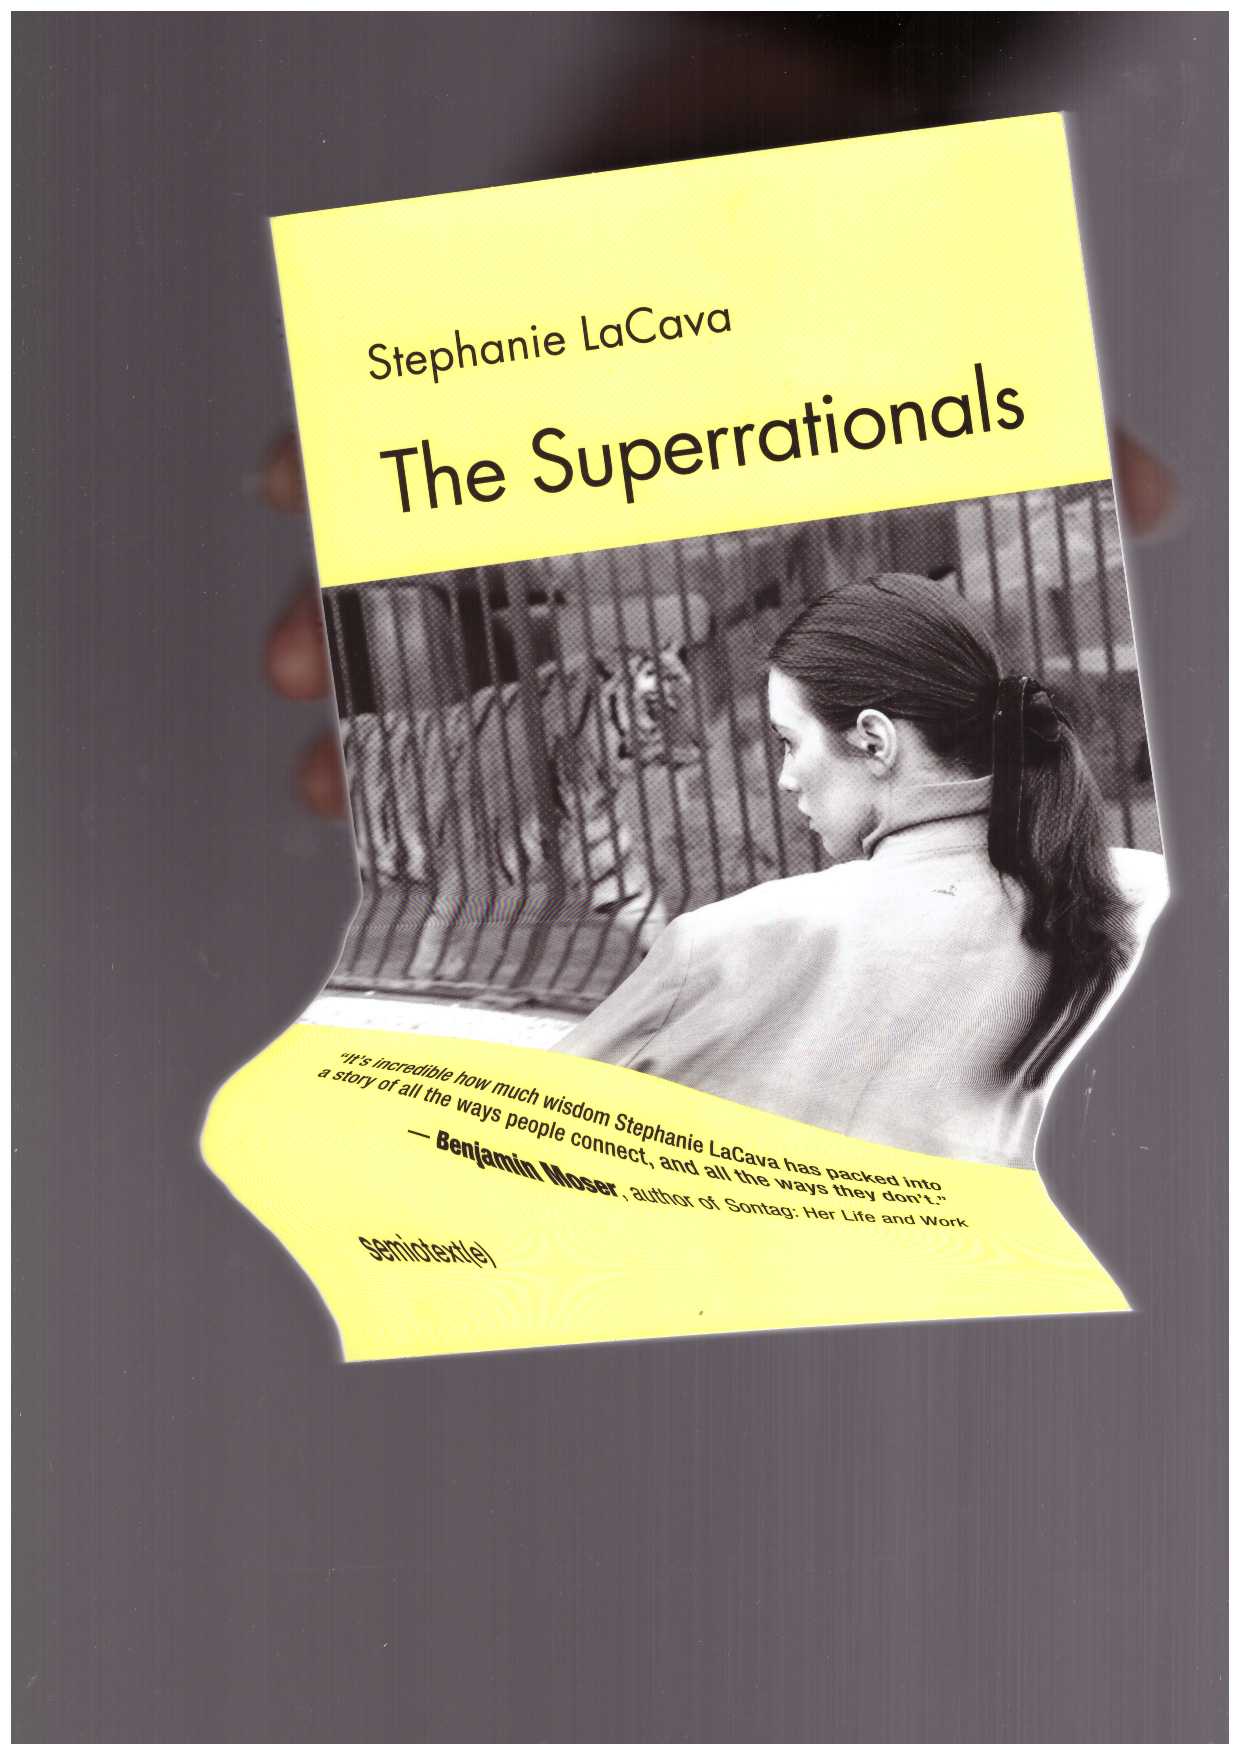  - The Superrationals. Online reading by Stephanie LaCava in conversation with Chris Kraus